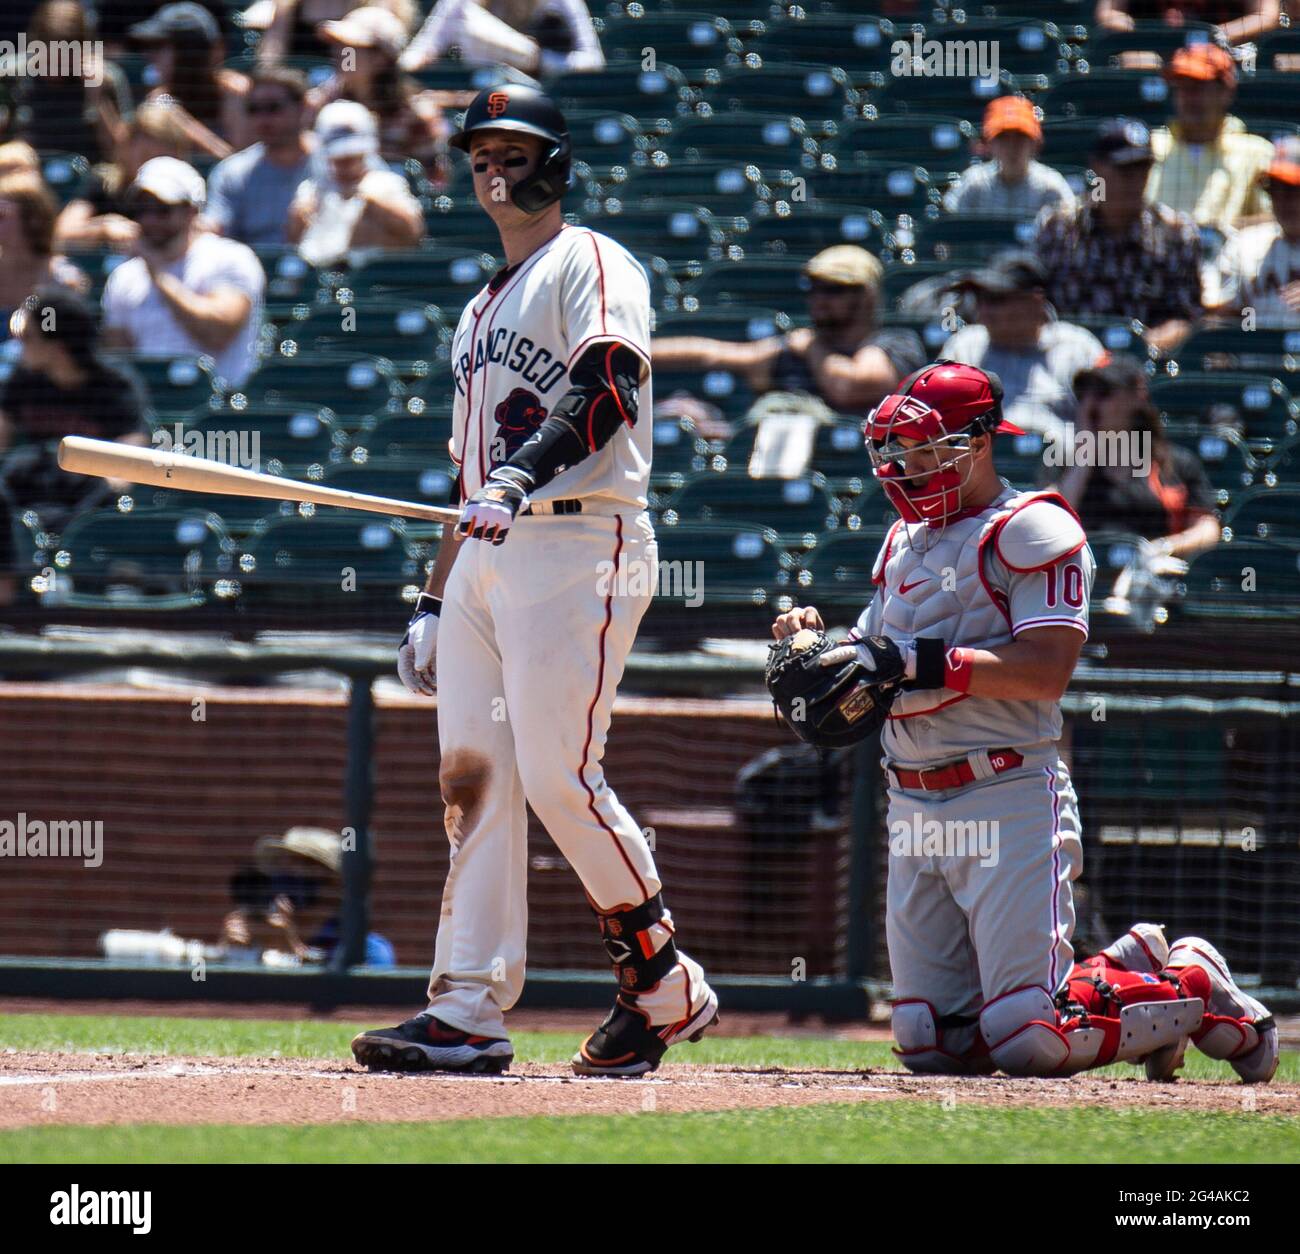 June19 2021 San Francisco CA, U.S.A. The Giants catcher Buster Posey (28) up to bat during the MLB game between the Philadelphia Phillies and San Francisco Giants, the Giants lost 13-6 at Oracle Park San Francisco Calif. Thurman James/CSM Stock Photo